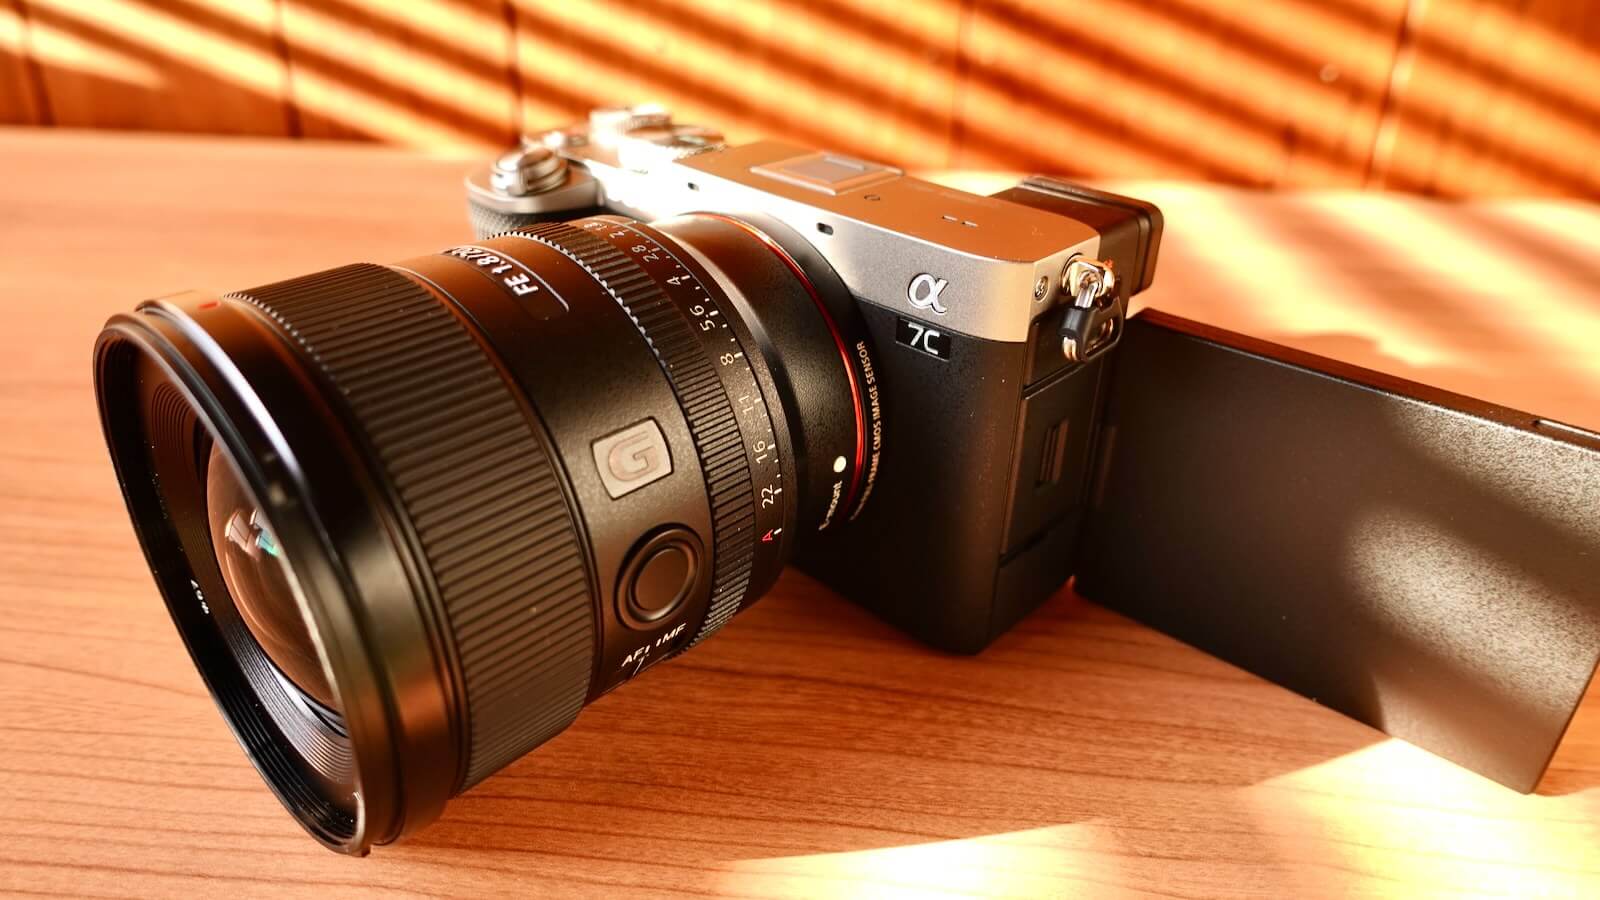 SONY A7C with FE 20mm F1.8 G lens